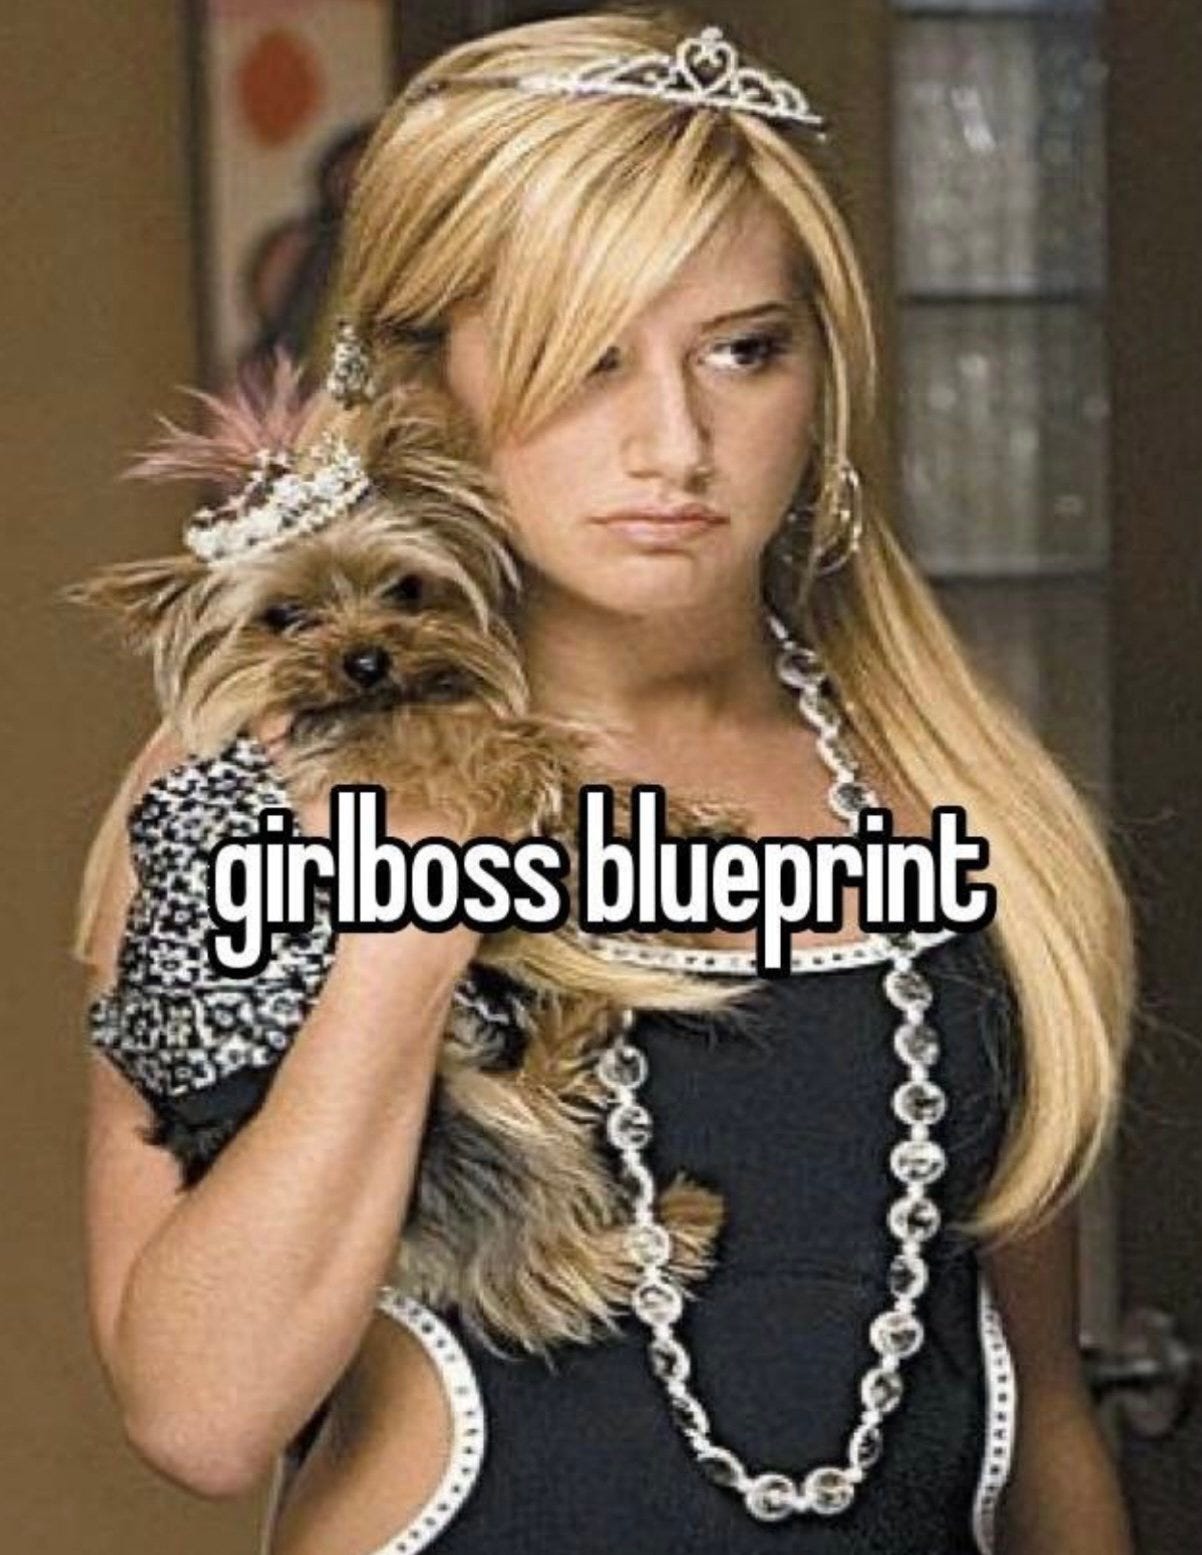 a meme of sharpie with her yorkie that says girl boss blueprint